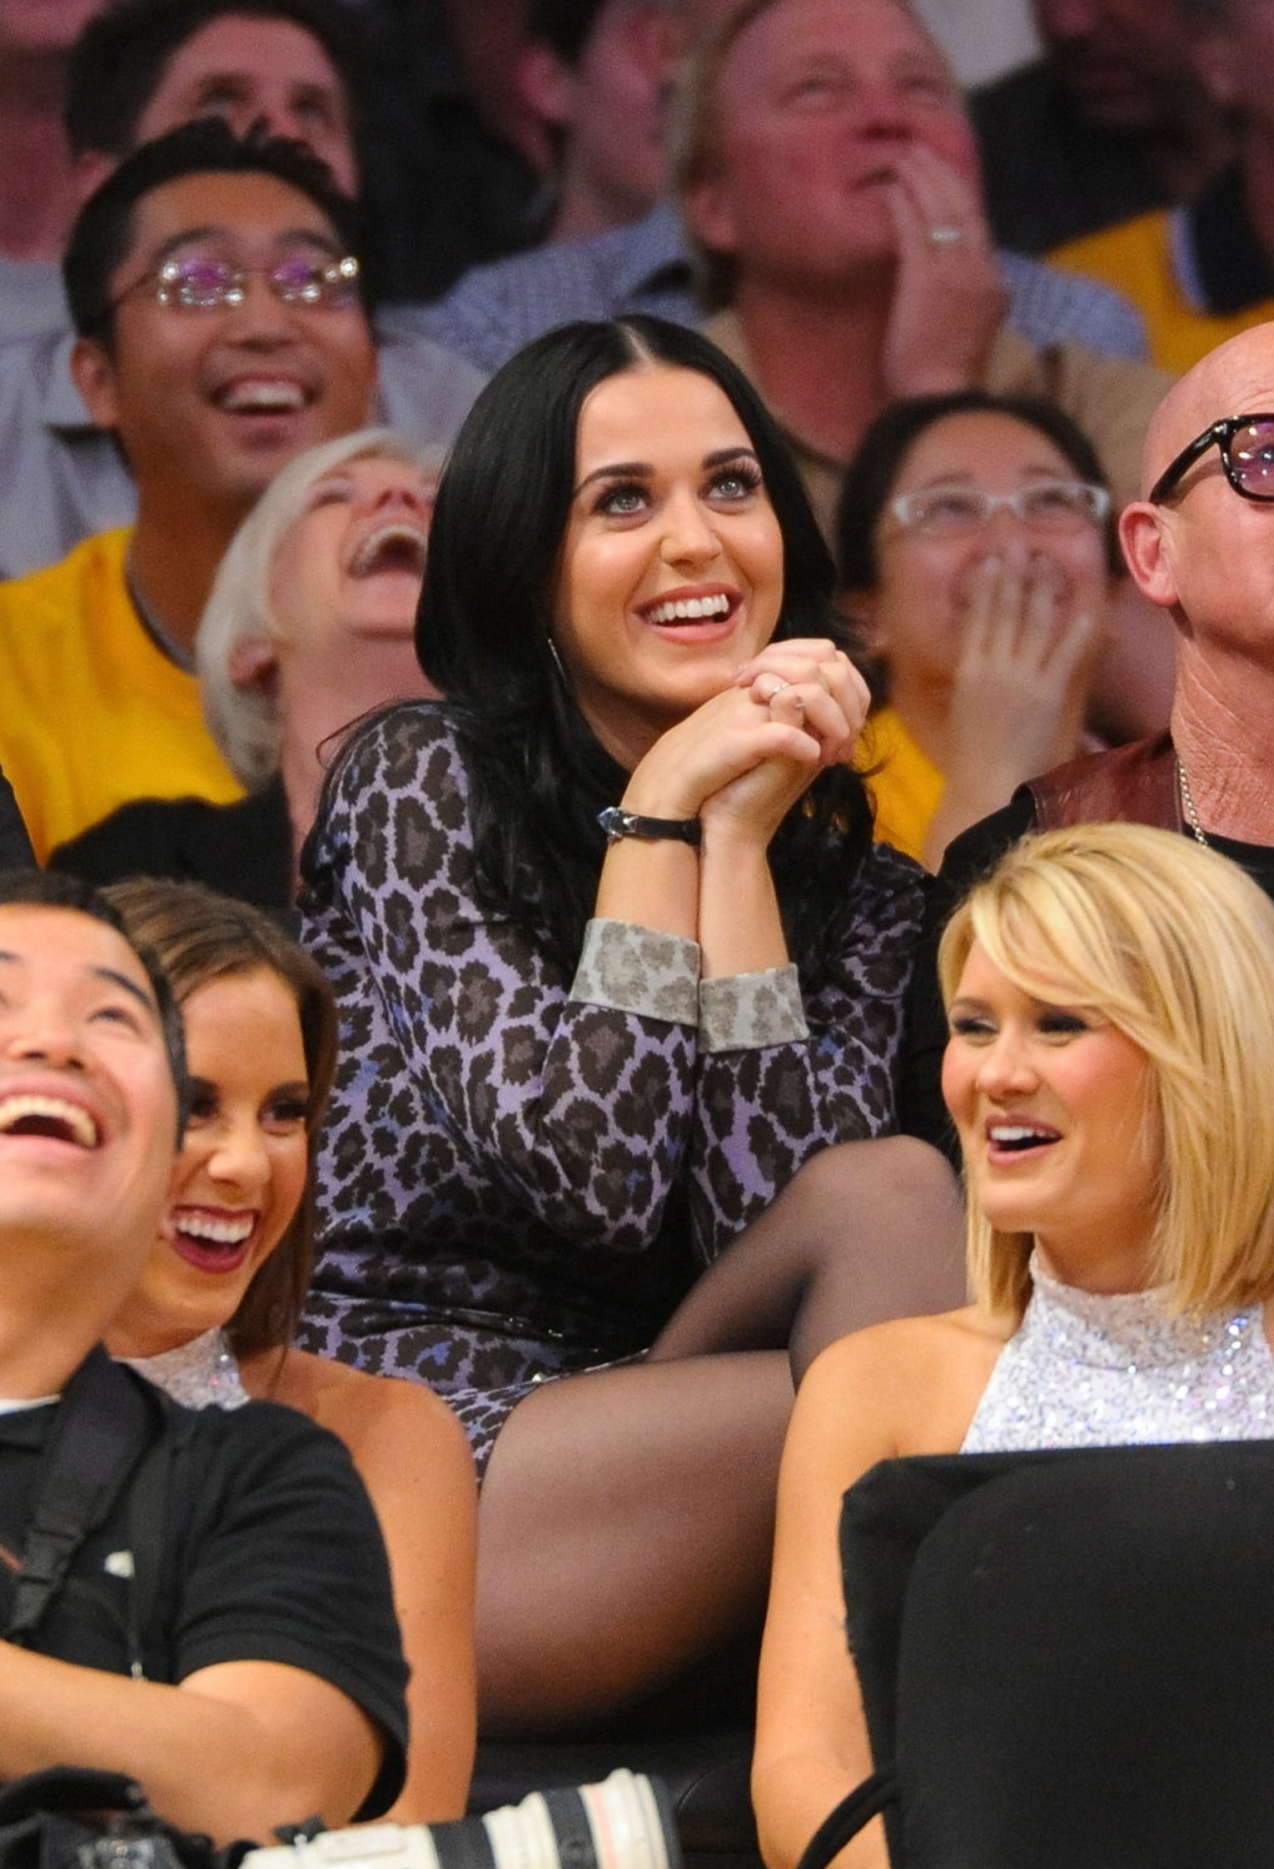 Katy Perry - at Staples Center in LA watching the Lakers vs Mavericks game